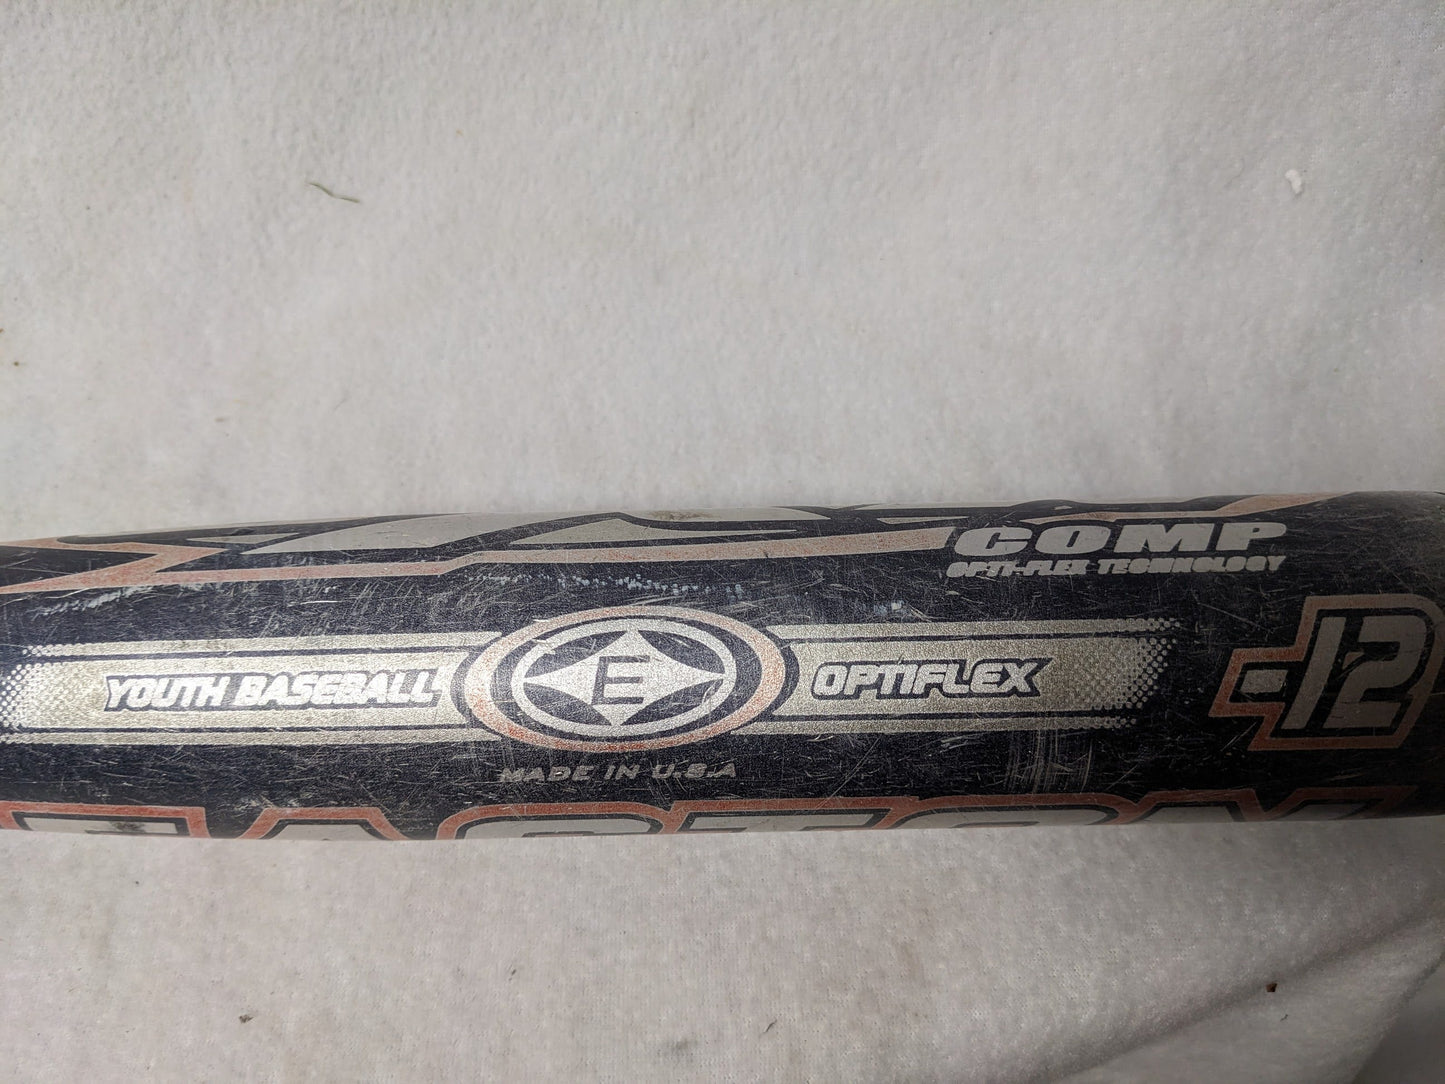 Easton SC888 Baseball Bat Size 29 In 17 Oz Color Silver Condition Used